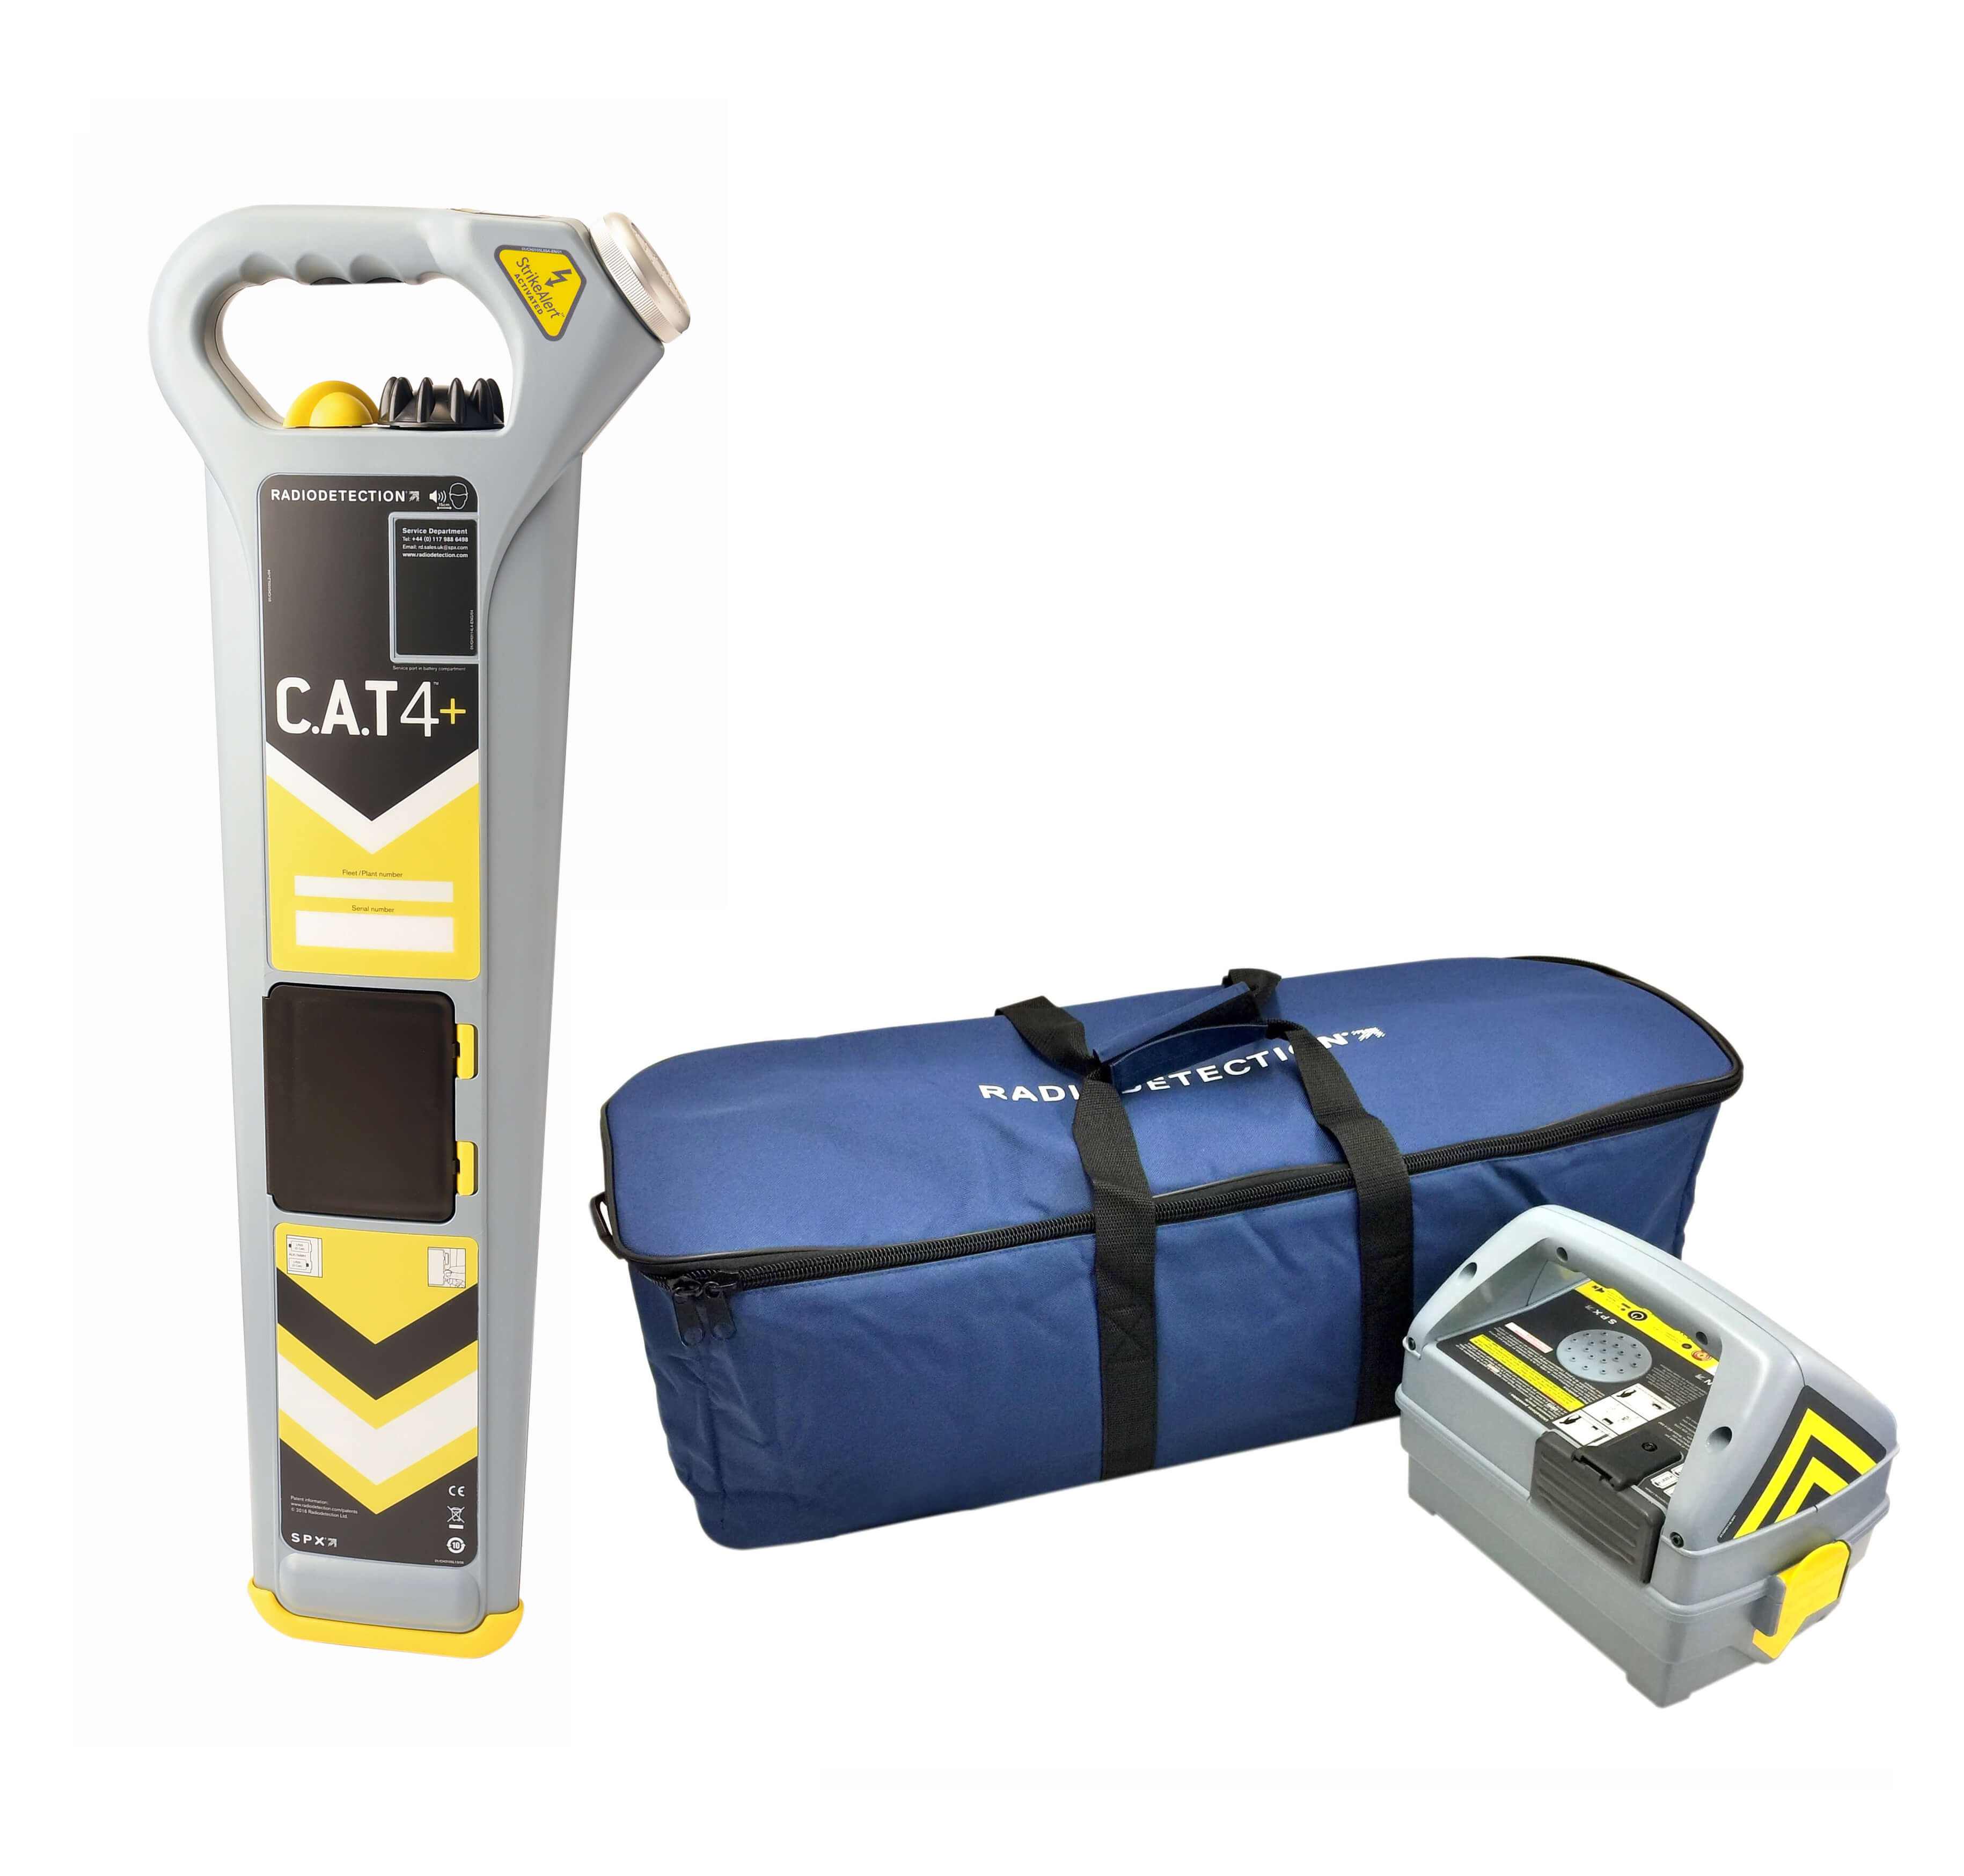 Radiodetection CAT4+ Kit with Genny4 and Bag